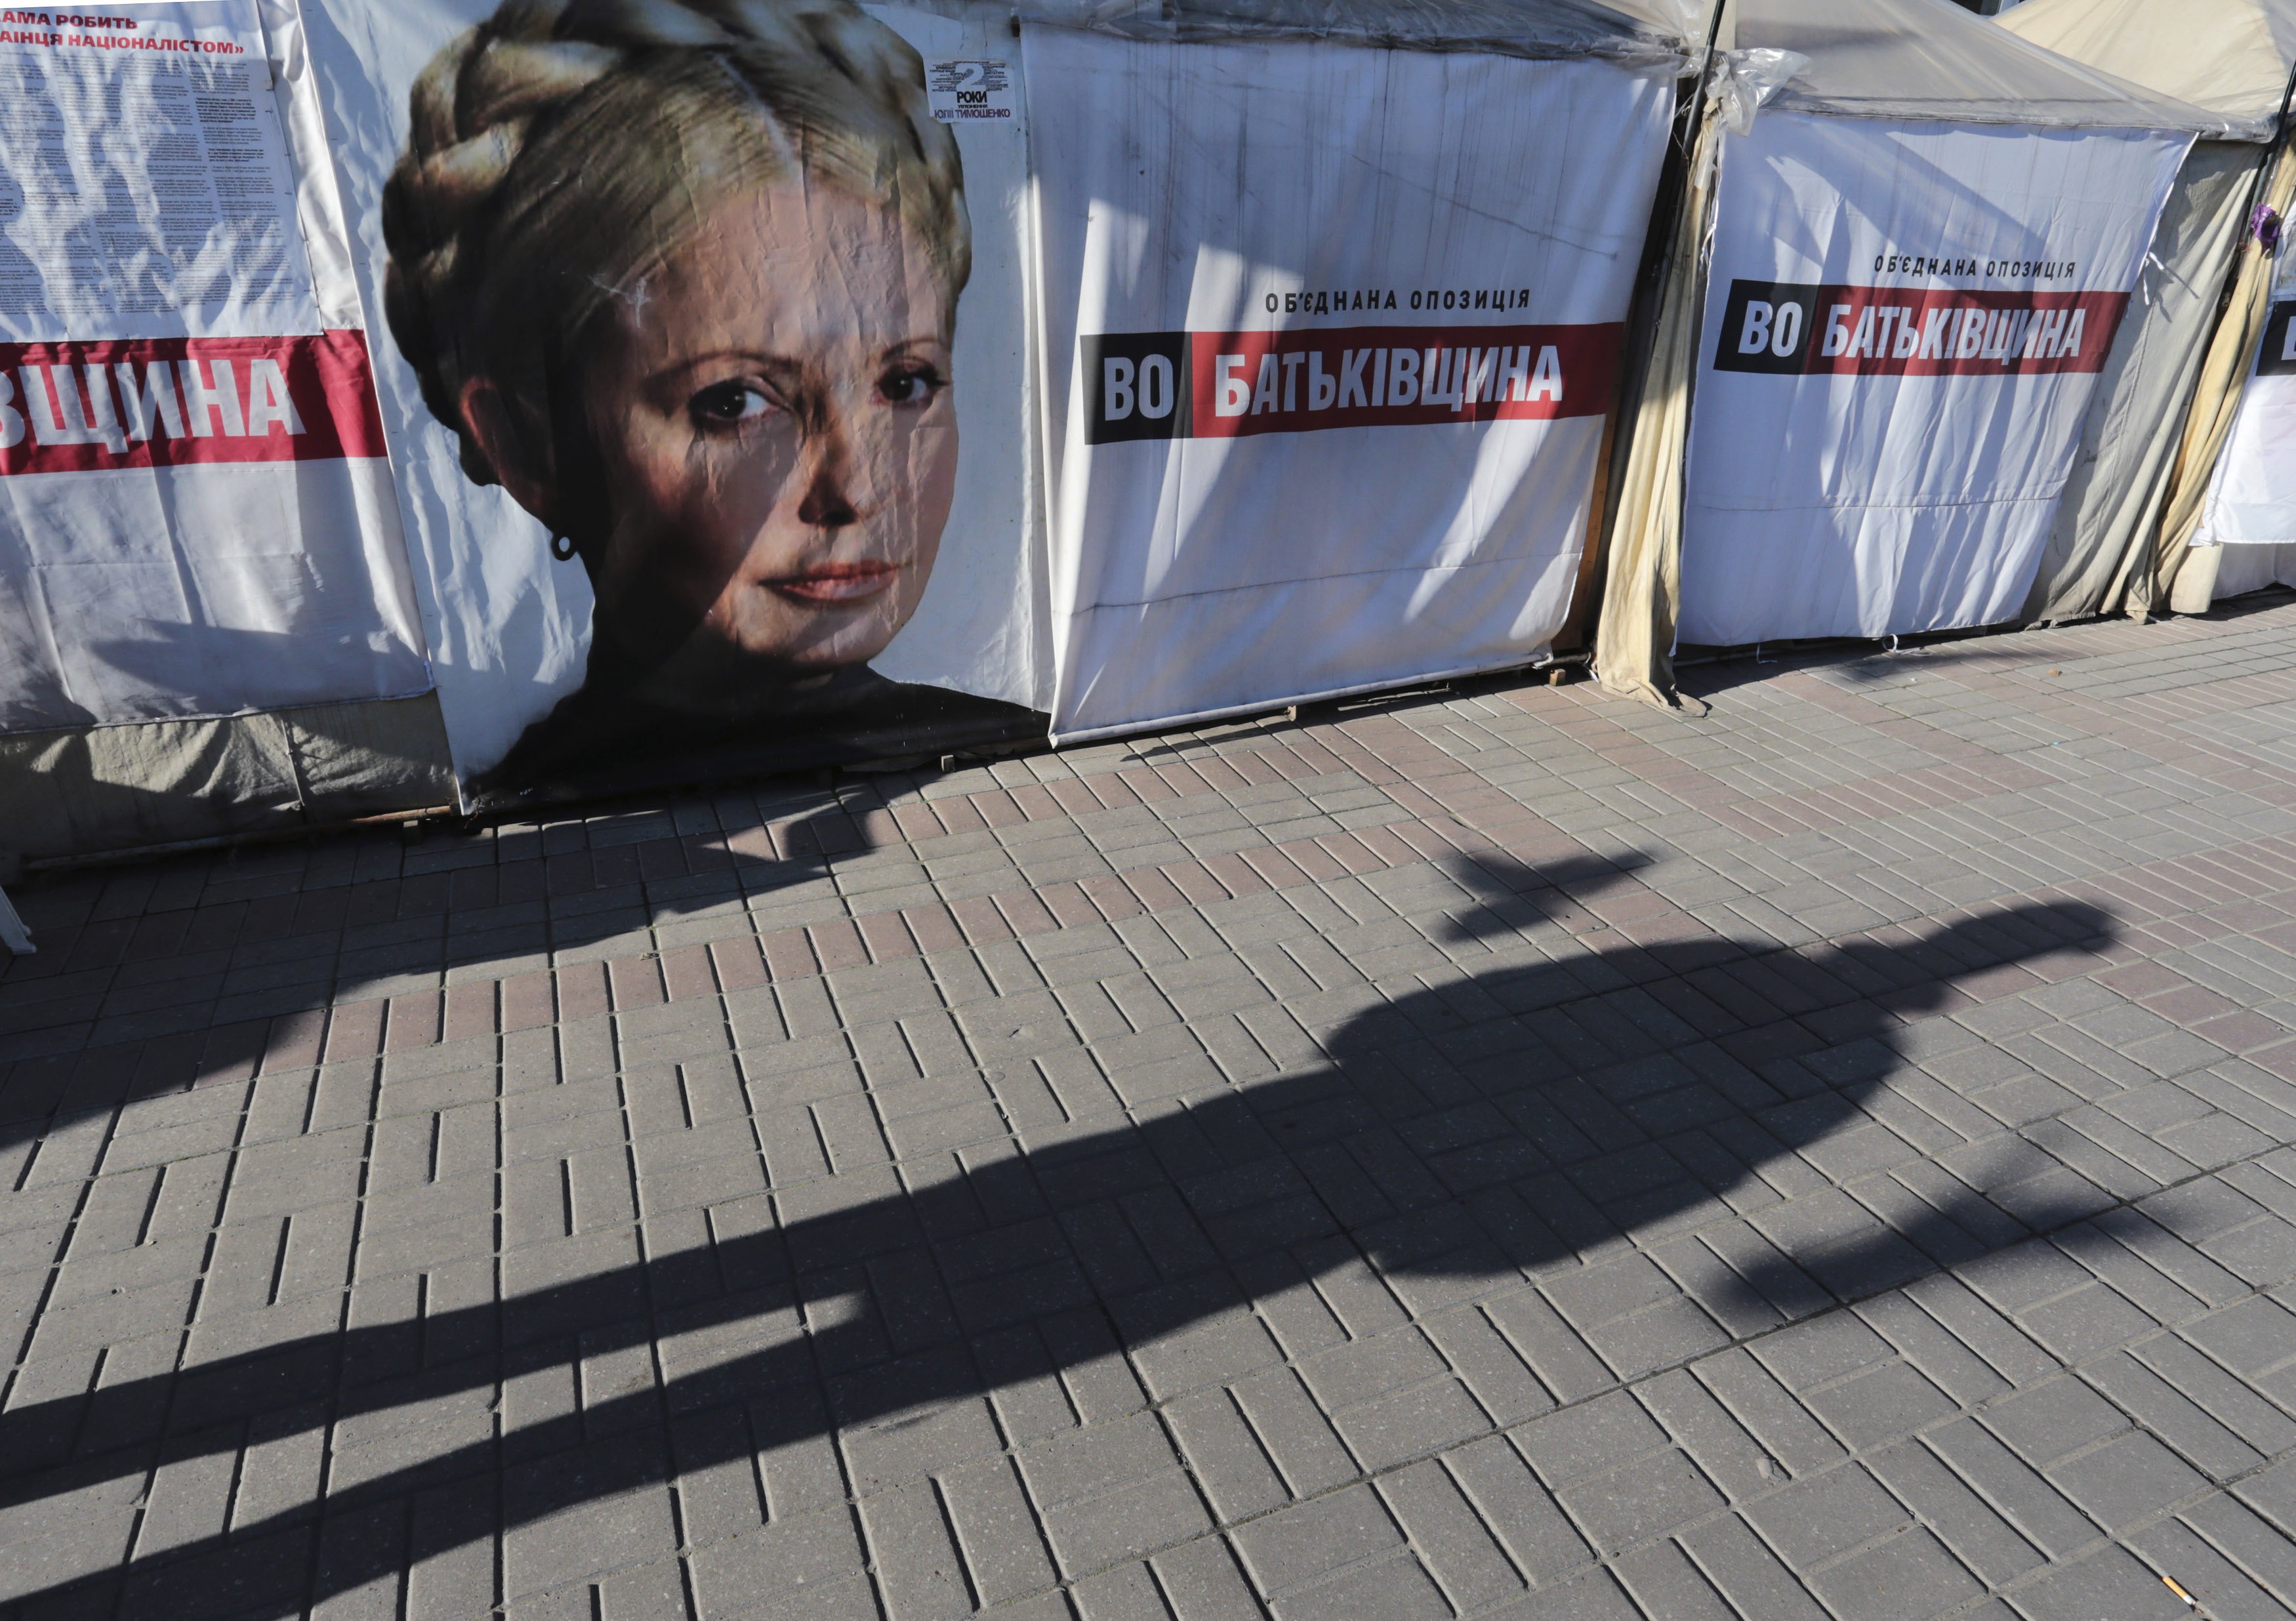 Shadows are cast during a protest by supporters of jailed former Ukrainian leader Yuliya Tymoshenko in Kiev. Photo: Reuters